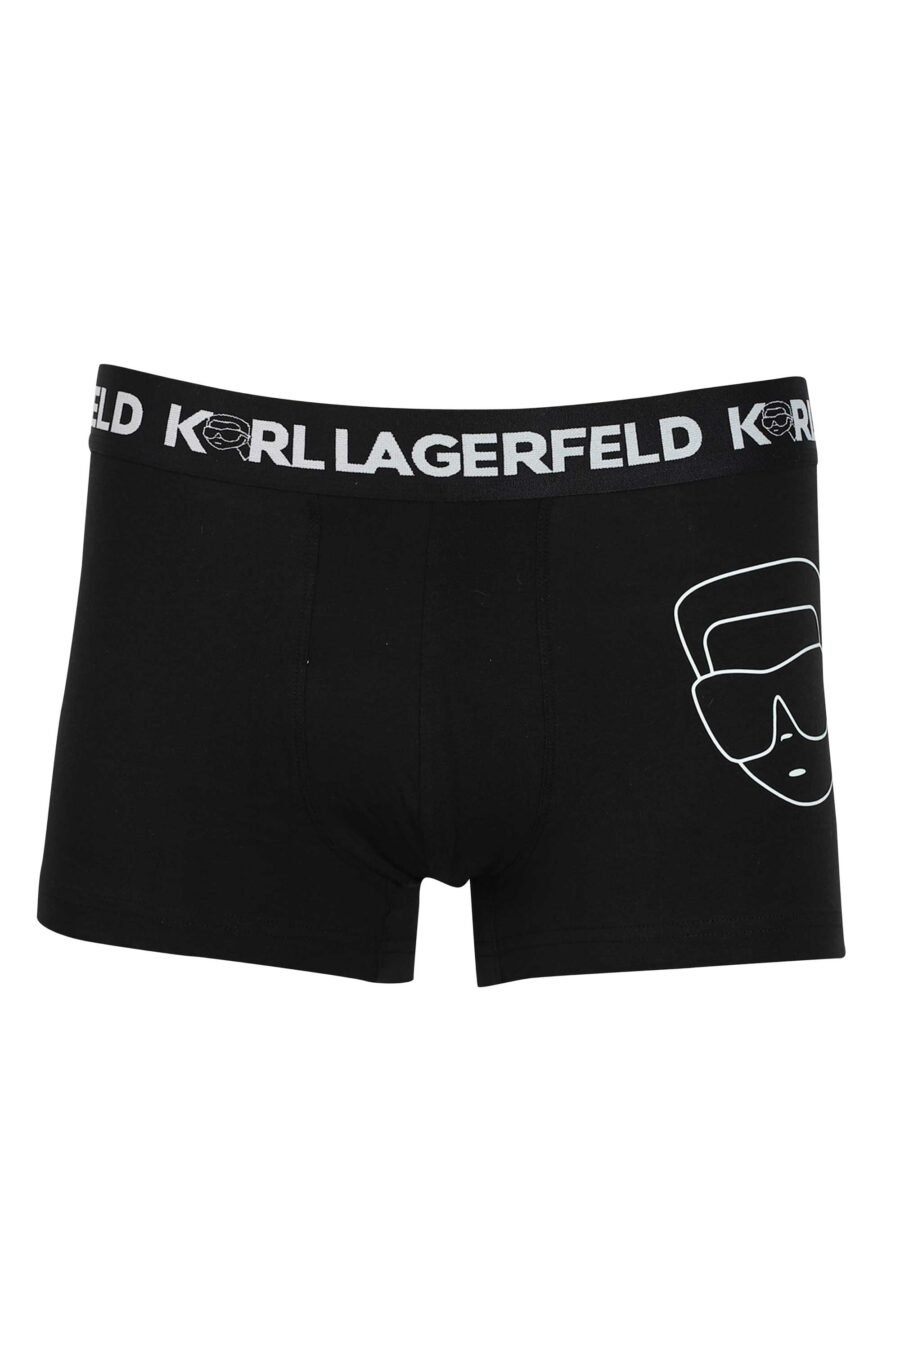 Pack of three black boxers with different "karl" prints - 8720744054580 5